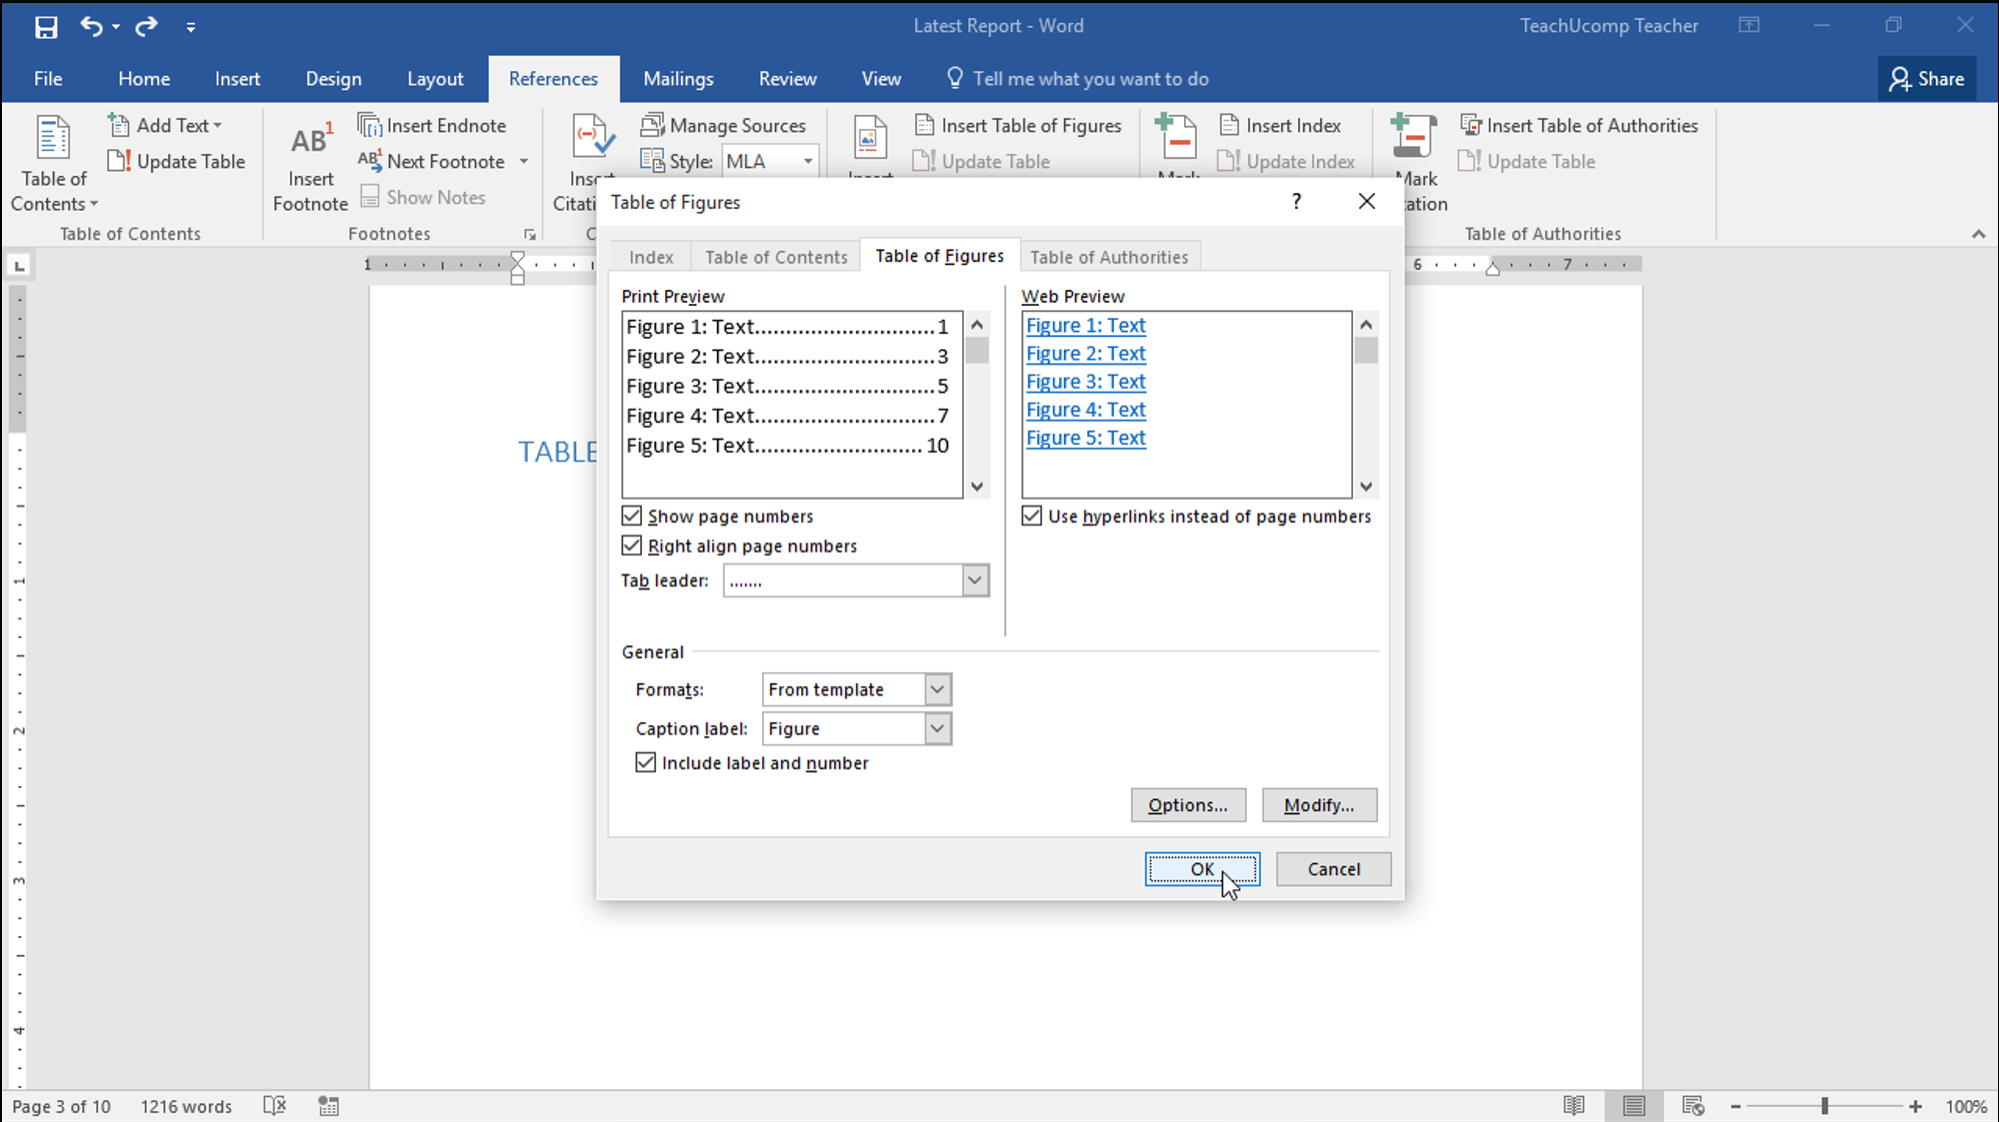 Insert A Table Of Figures In Word - Teachucomp, Inc. Within Microsoft Word Table Of Contents Template